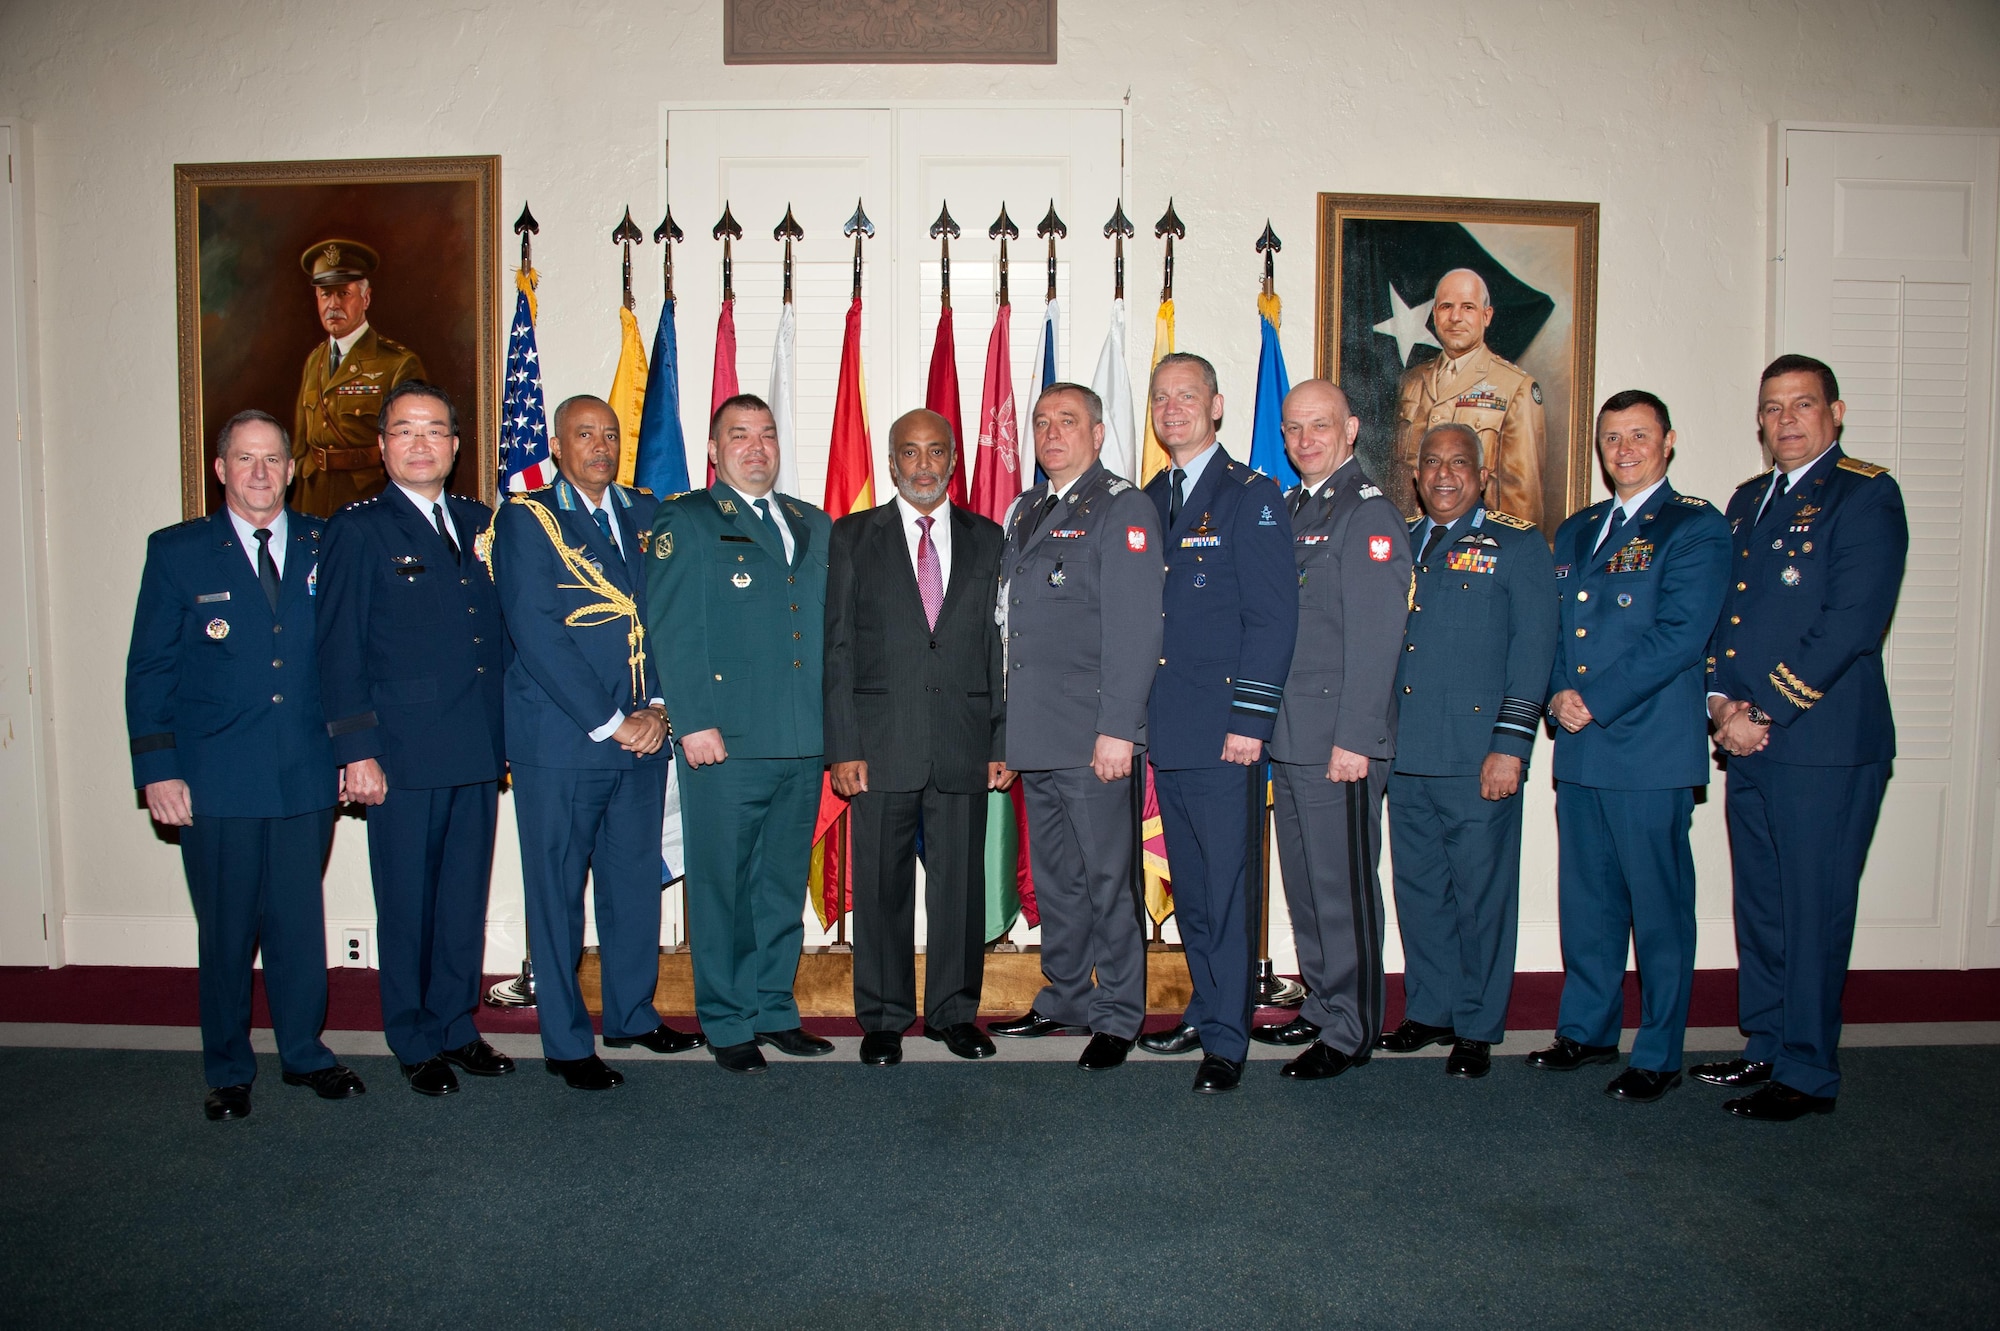 Air Force Chief of Staff Gen. David L. Goldfein honors international Air Chiefs inducted into the Air University International Honor Roll, April 7, 2017. The officers inducted during today’s ceremony were honored with a plaque in the International Officer School’s Honor Roll Room. (US Air Force photo by Melanie Rodgers Cox)